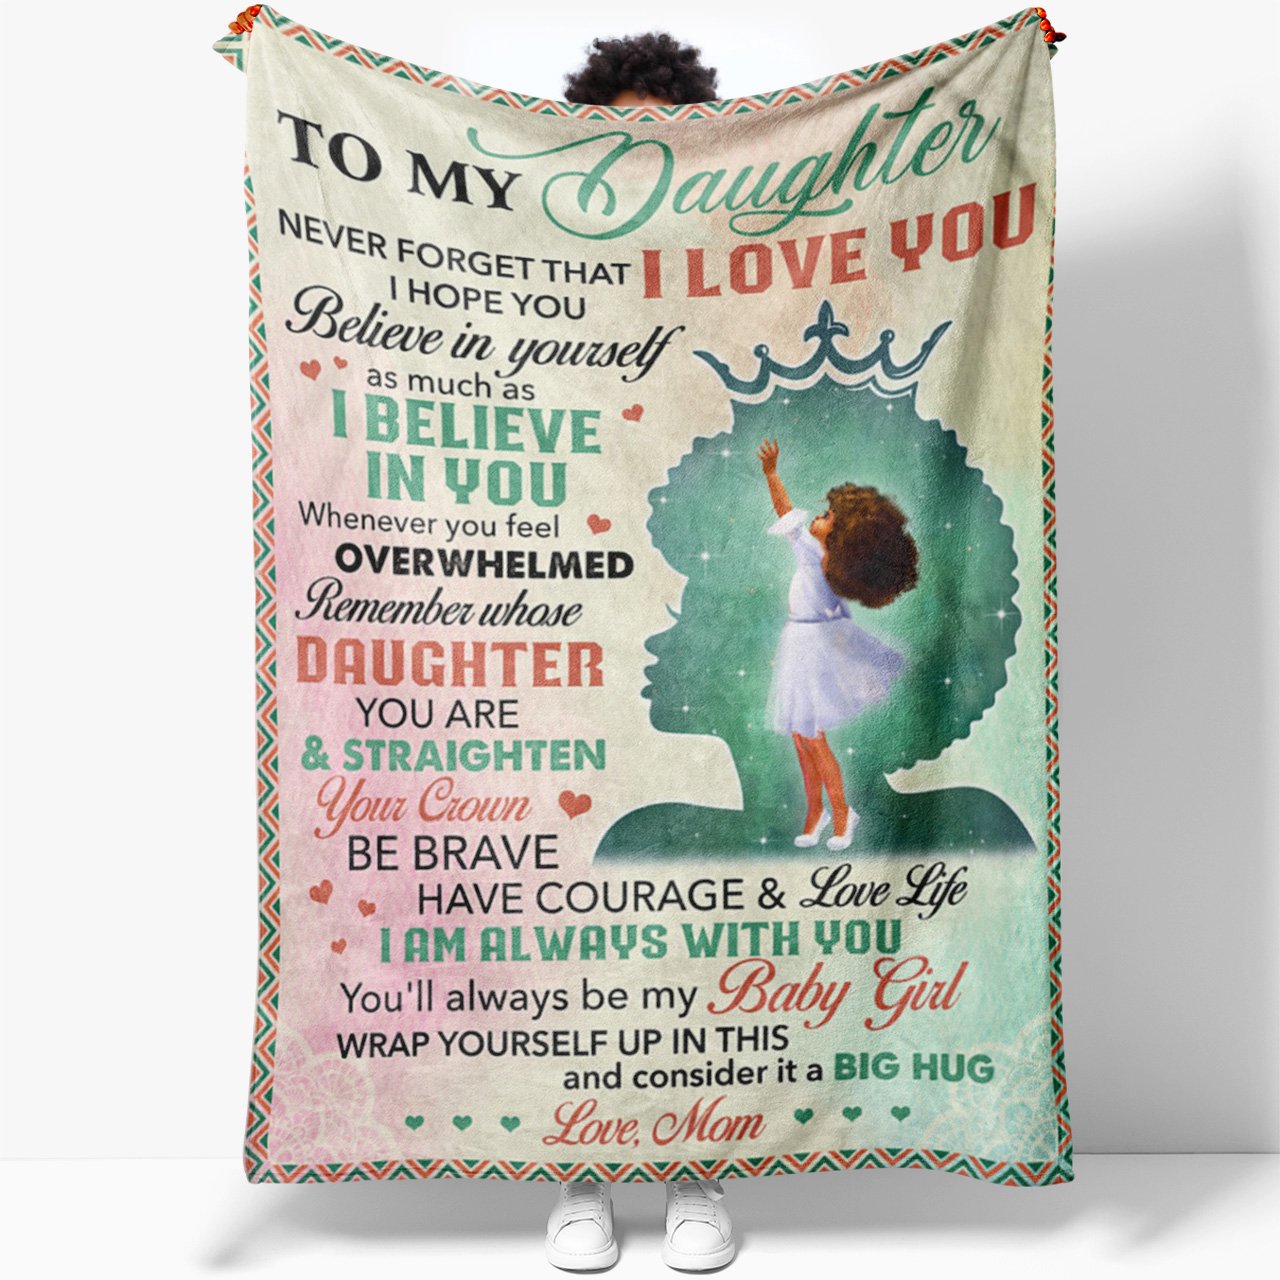 Blanket Gift to My Black Daughter, Straighten Your Crown Be Brave Have Courage Blanket, Mother Daughter Gifts, Birthday Gifts For Adult Daughter